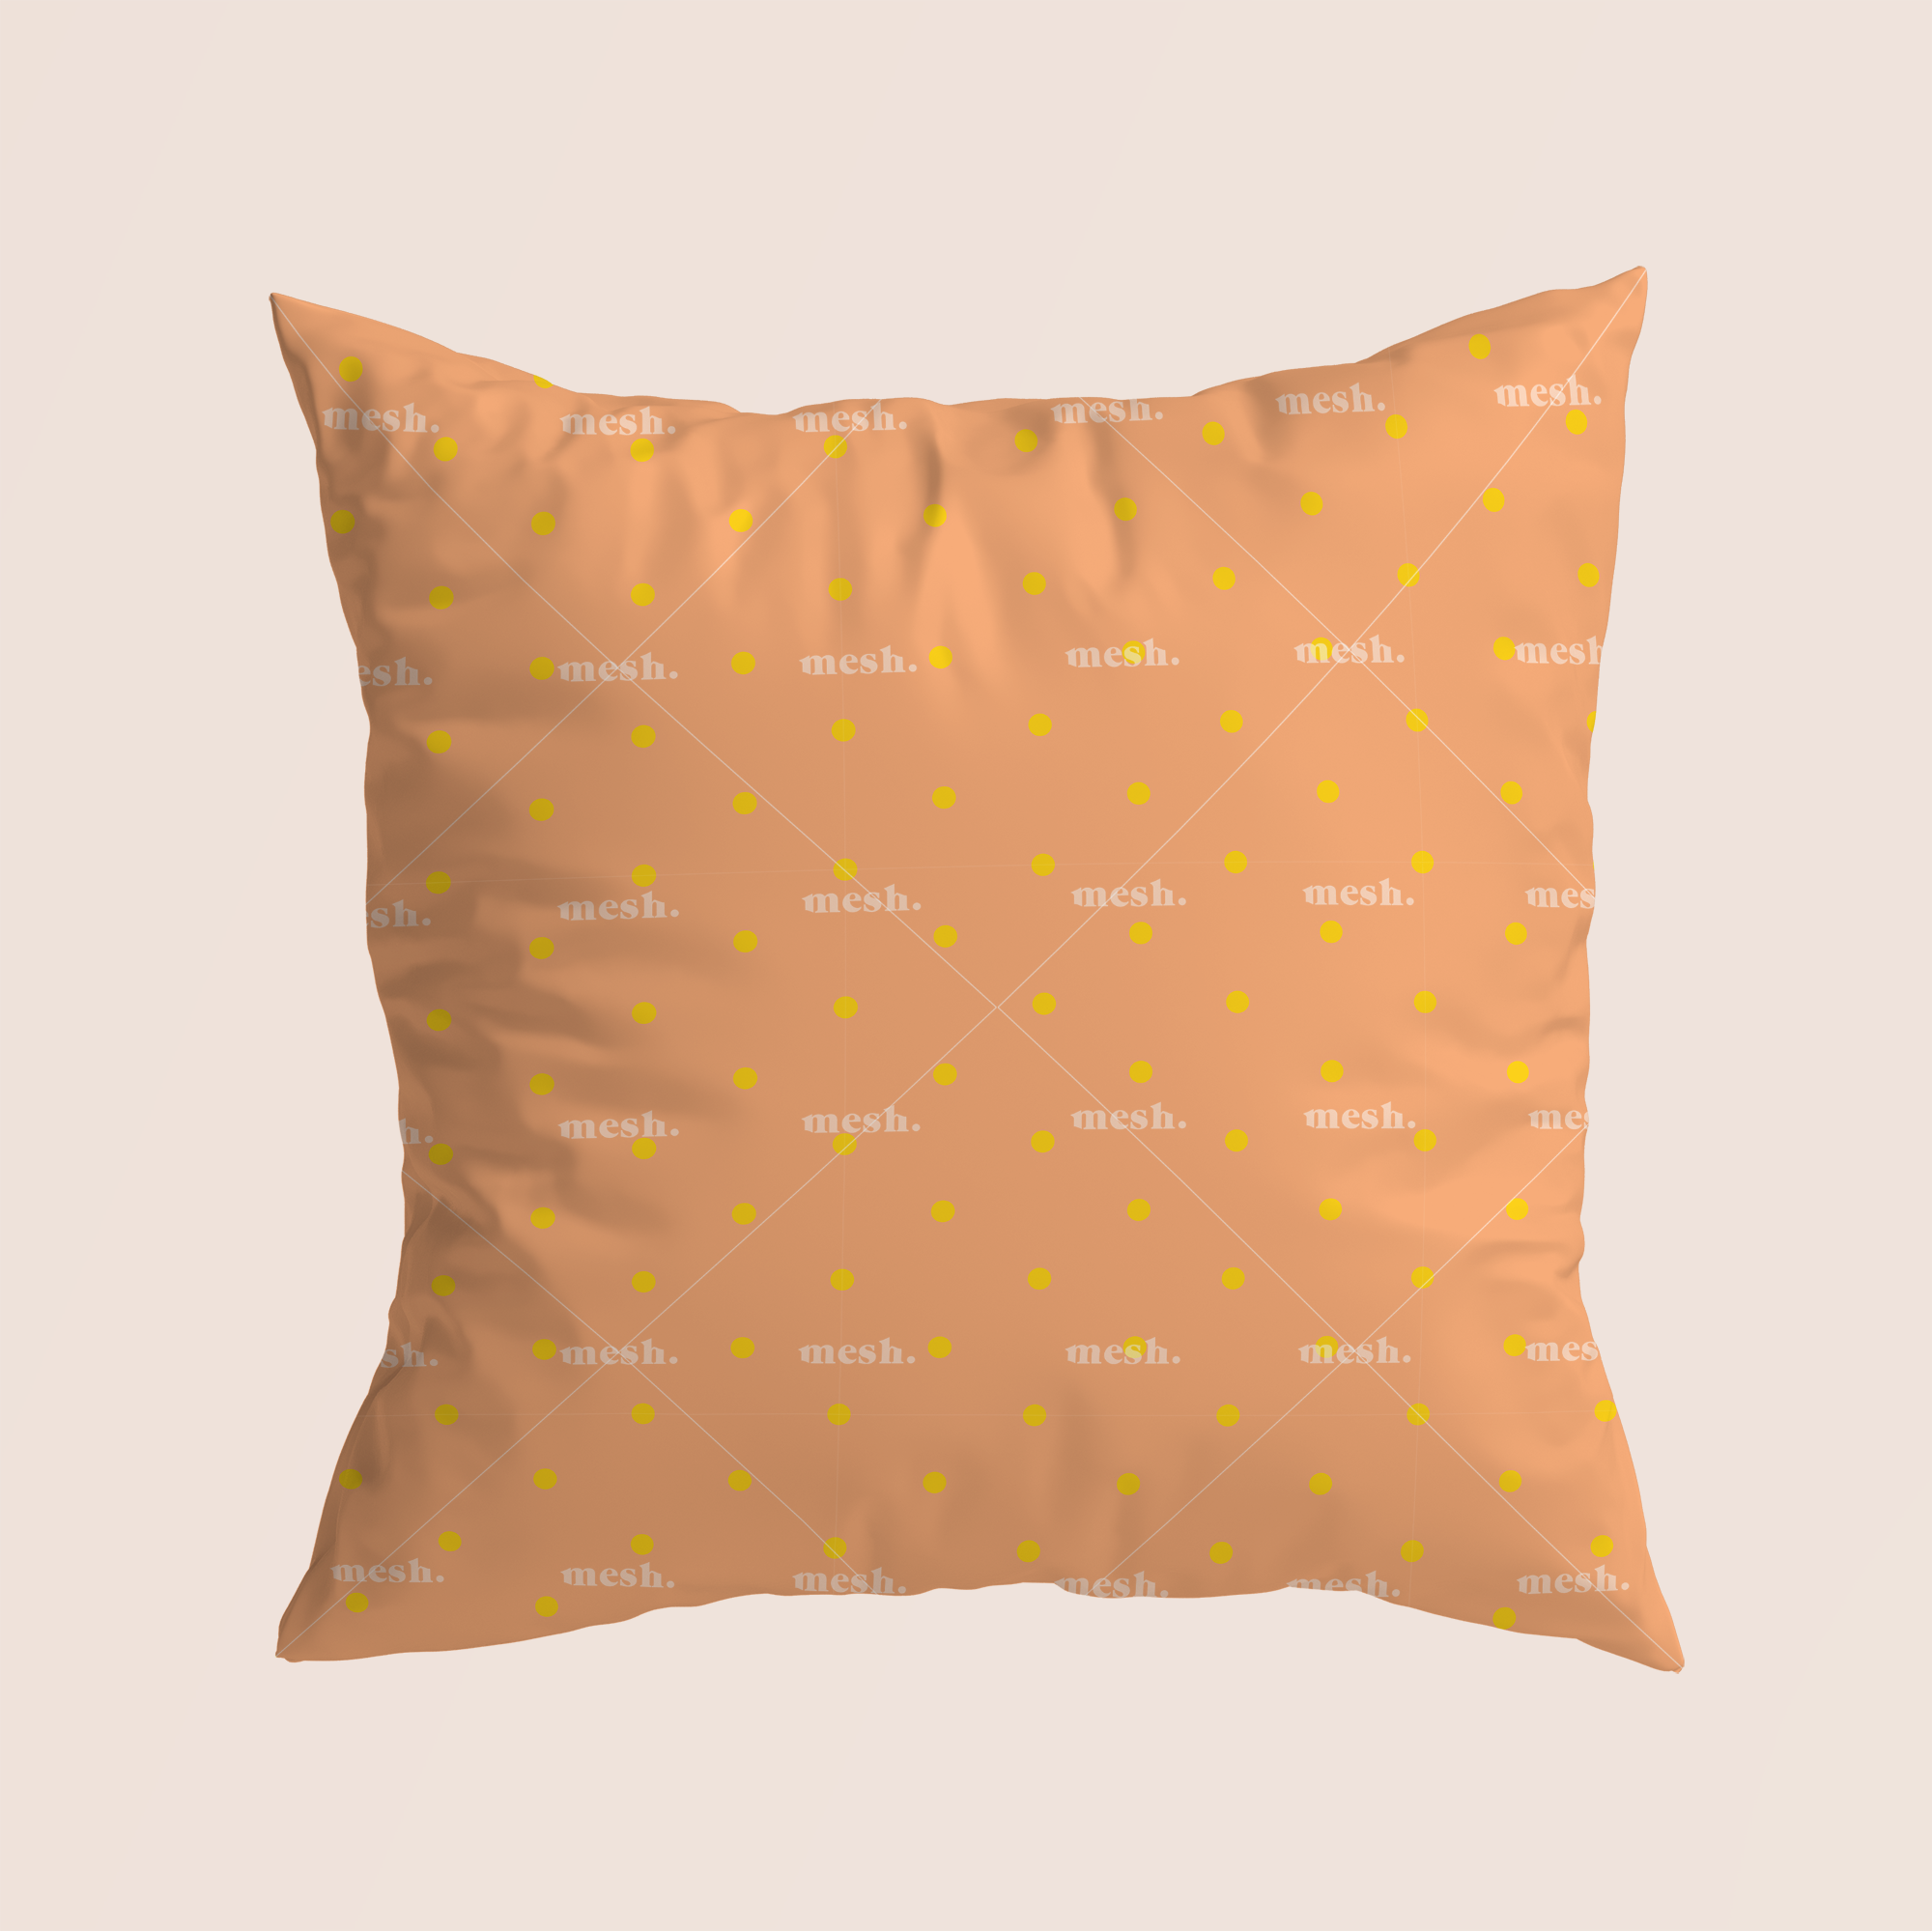 Trivial dots trendy in orange pattern design on recycled fabric home decor